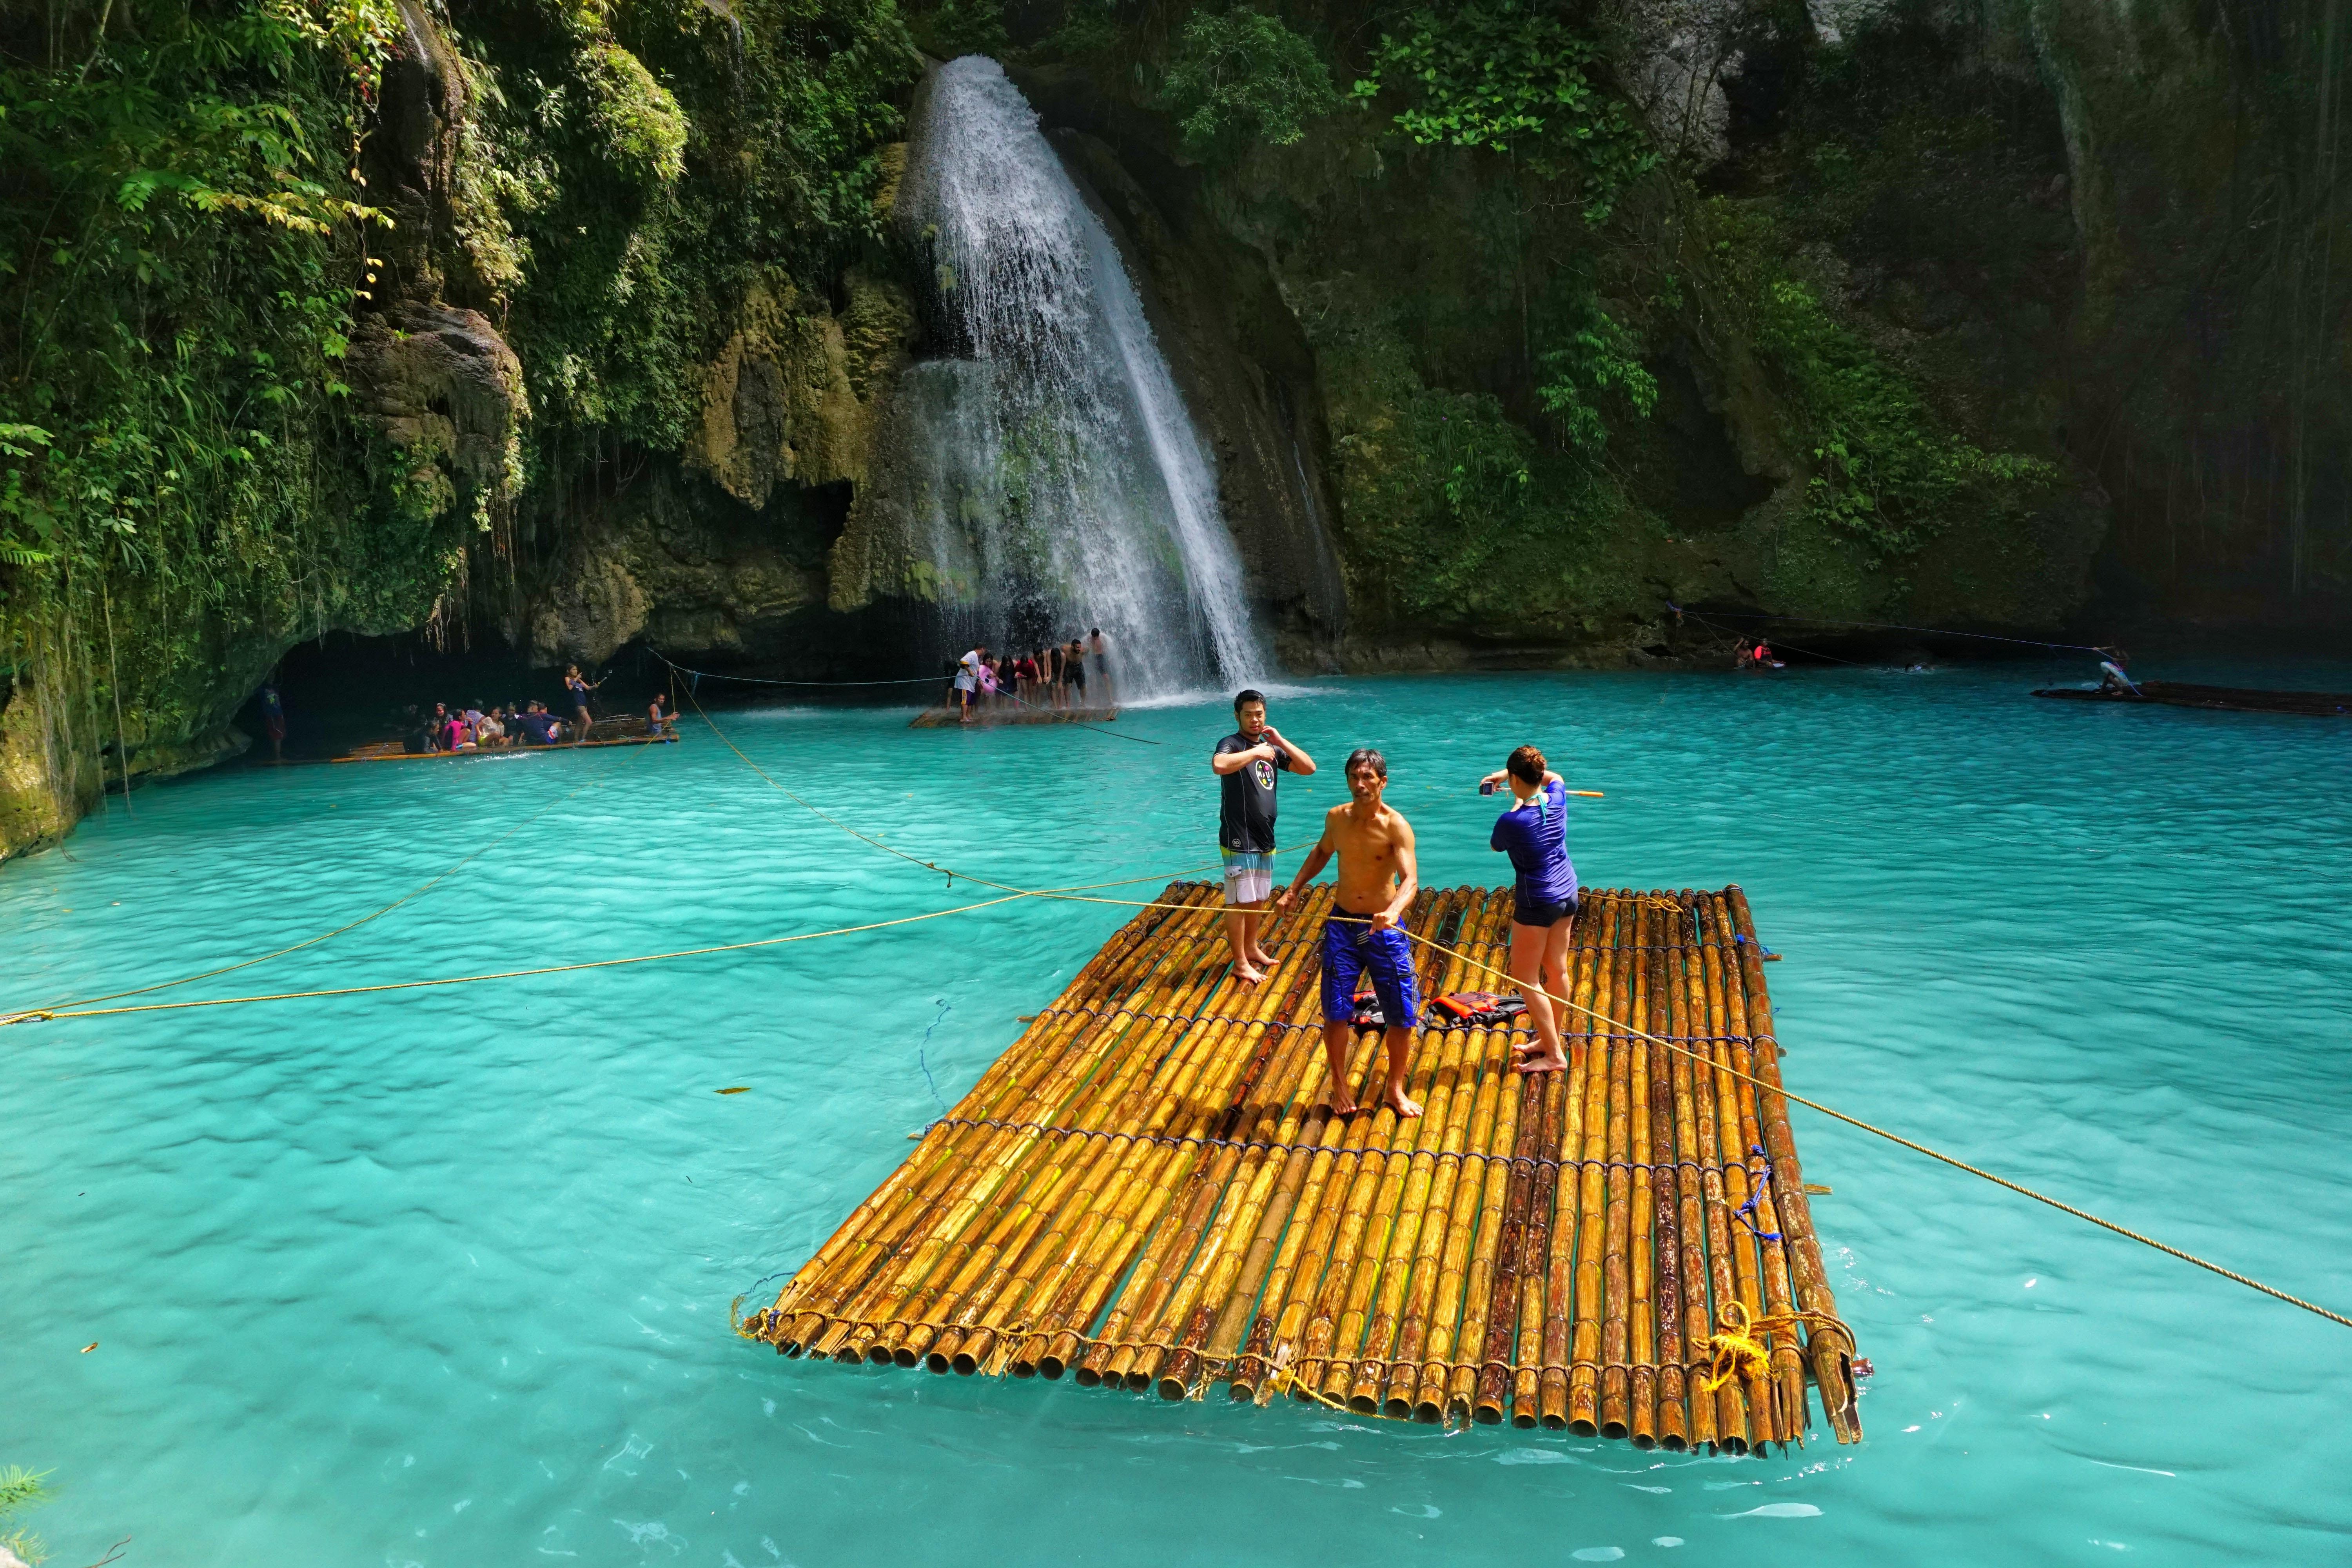 UNBELIEVABLY BLUE. Perhaps the most-photographed spot in Kawasan, just standing in front of this basin, you'll feel the stress melting away. Photo by Louie Lapat/Rappler  